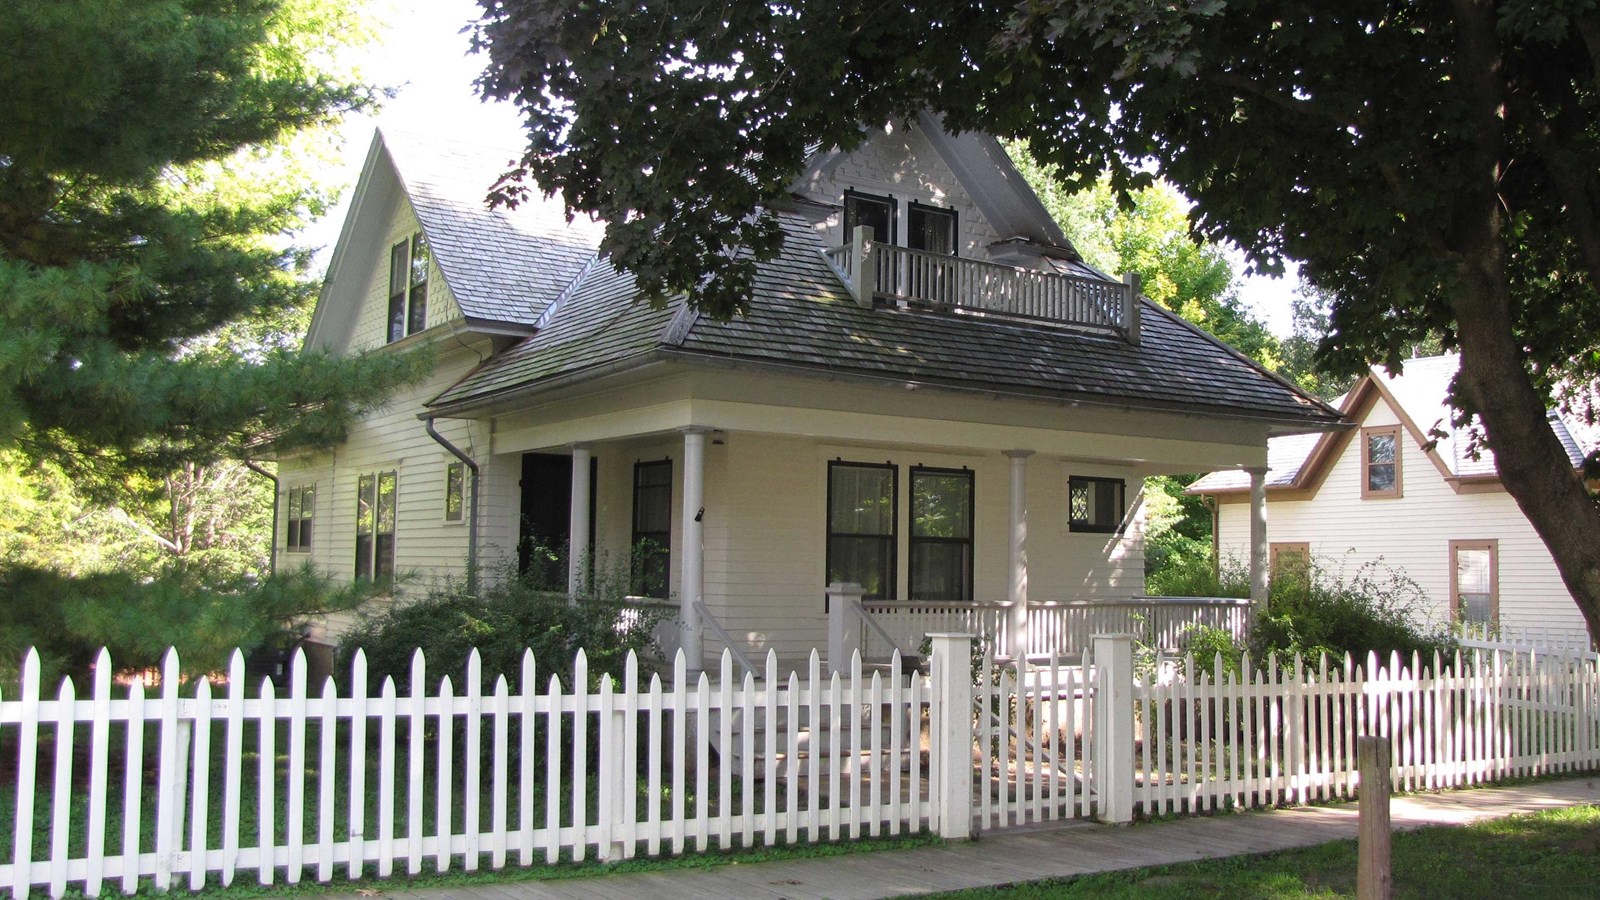 A picket fence encloses a white two-story house with a porch.